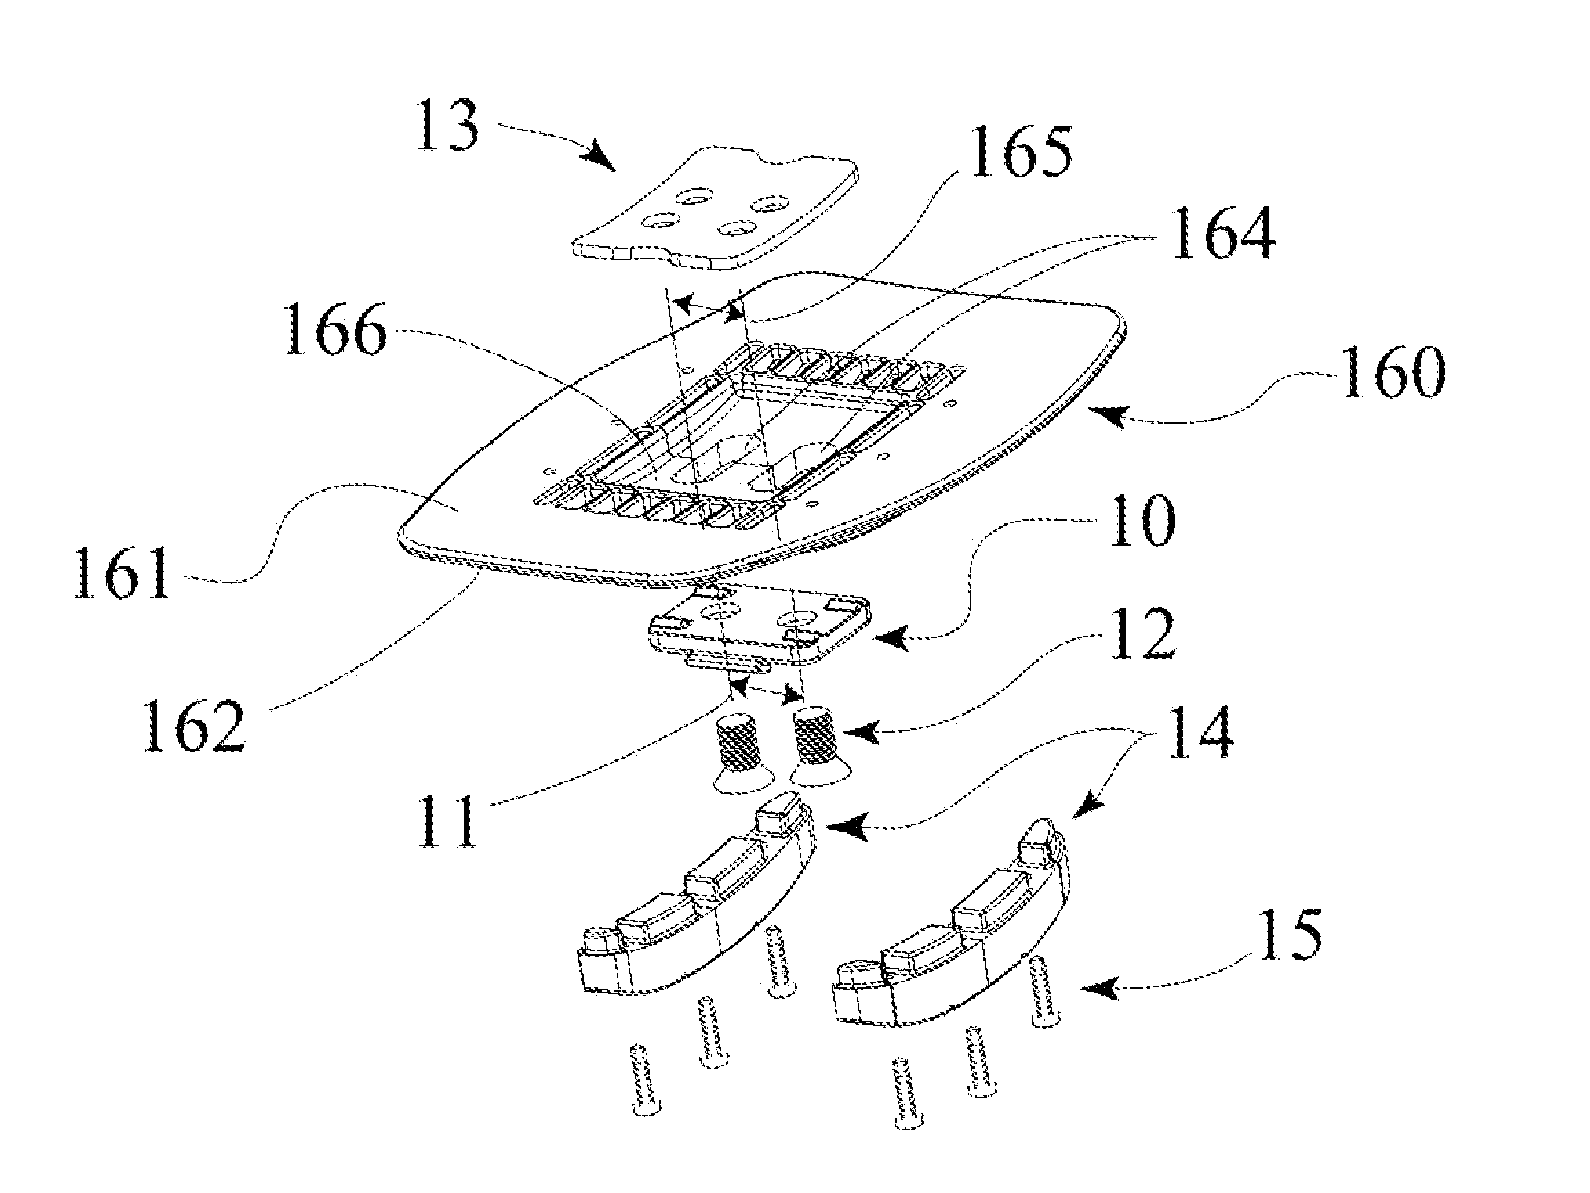 Device for adapting a shoe to attach a cycling cleat